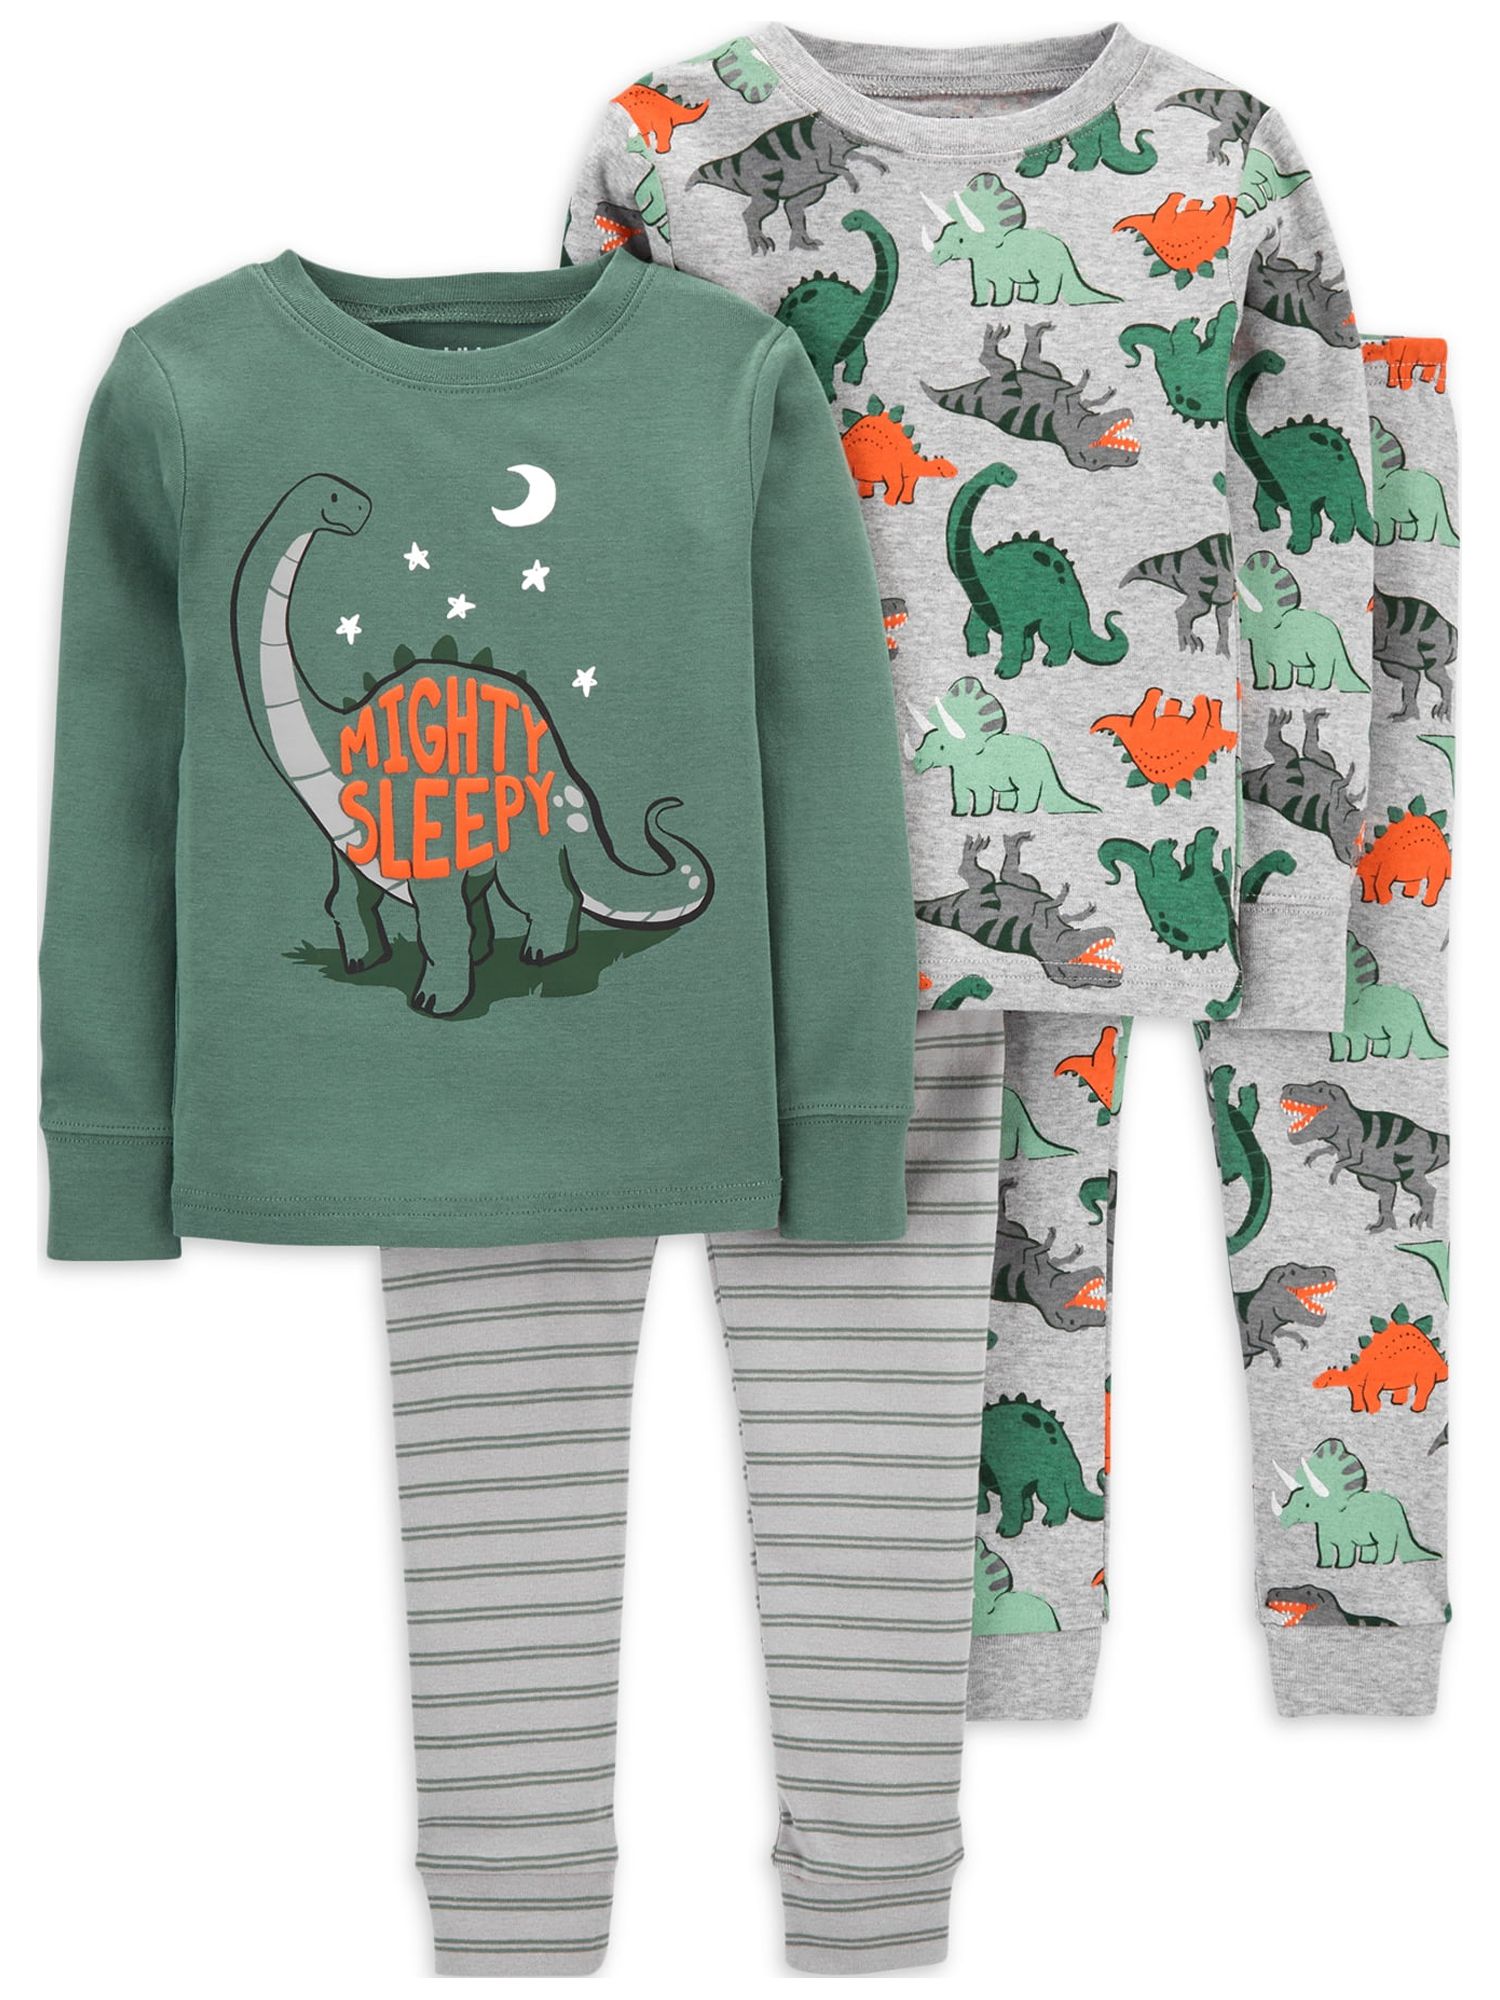 Carter's Child of Mine Baby and Toddler Boy Long Sleeve Snug-Fit Pajamas, 4-Piece Pants Set, Sizes 12M-5T - image 1 of 3